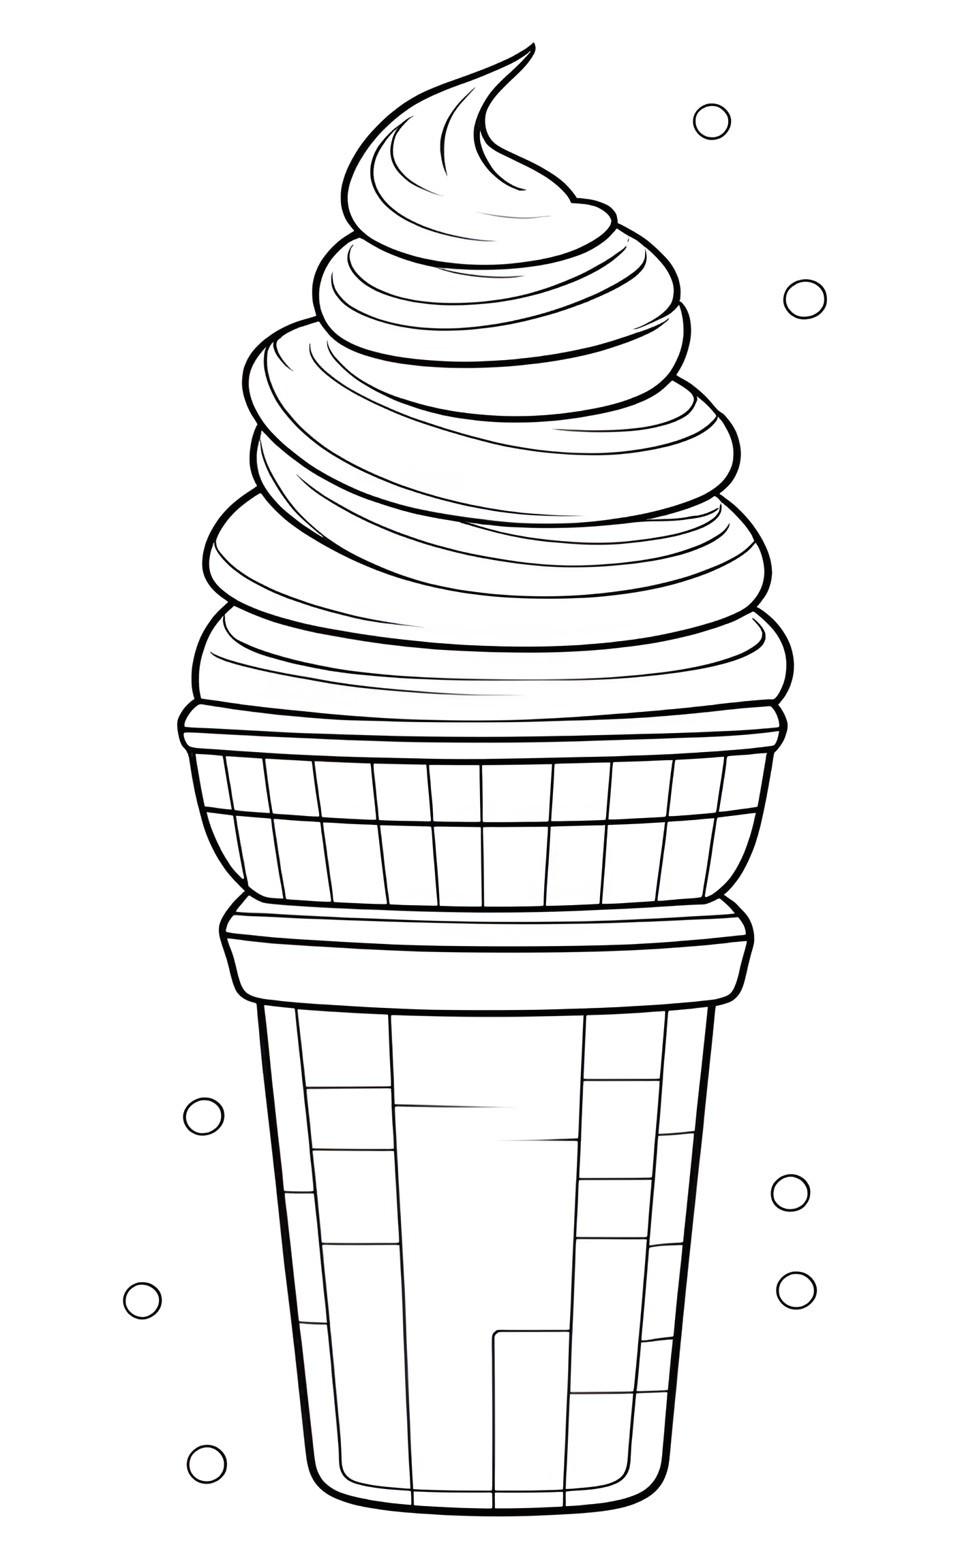 Simple Summer Ice Cream coloring pages for kids